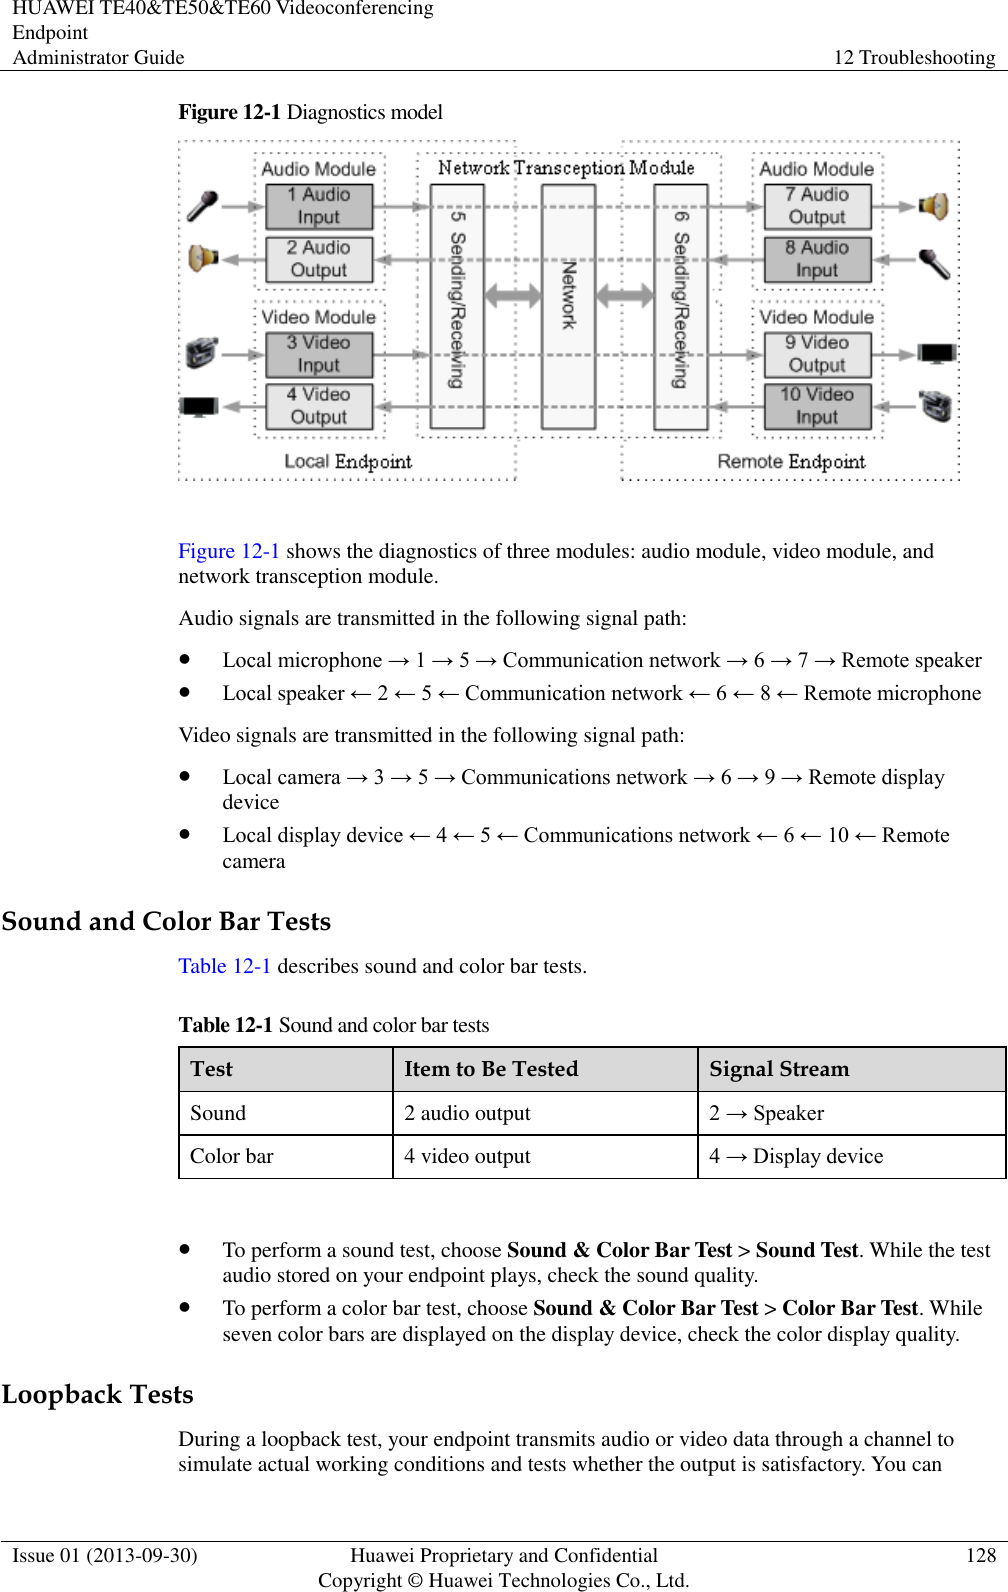 HUAWEI TE40&amp;TE50&amp;TE60 Videoconferencing Endpoint Administrator Guide 12 Troubleshooting  Issue 01 (2013-09-30) Huawei Proprietary and Confidential                                     Copyright © Huawei Technologies Co., Ltd. 128  Figure 12-1 Diagnostics model   Figure 12-1 shows the diagnostics of three modules: audio module, video module, and network transception module. Audio signals are transmitted in the following signal path:  Local microphone → 1 → 5 → Communication network → 6 → 7 → Remote speaker  Local speaker ← 2 ← 5 ← Communication network ← 6 ← 8 ← Remote microphone Video signals are transmitted in the following signal path:  Local camera → 3 → 5 → Communications network → 6 → 9 → Remote display device  Local display device ← 4 ← 5 ← Communications network ← 6 ← 10 ← Remote camera Sound and Color Bar Tests Table 12-1 describes sound and color bar tests. Table 12-1 Sound and color bar tests Test Item to Be Tested Signal Stream Sound 2 audio output 2 → Speaker Color bar 4 video output 4 → Display device   To perform a sound test, choose Sound &amp; Color Bar Test &gt; Sound Test. While the test audio stored on your endpoint plays, check the sound quality.  To perform a color bar test, choose Sound &amp; Color Bar Test &gt; Color Bar Test. While seven color bars are displayed on the display device, check the color display quality. Loopback Tests During a loopback test, your endpoint transmits audio or video data through a channel to simulate actual working conditions and tests whether the output is satisfactory. You can 